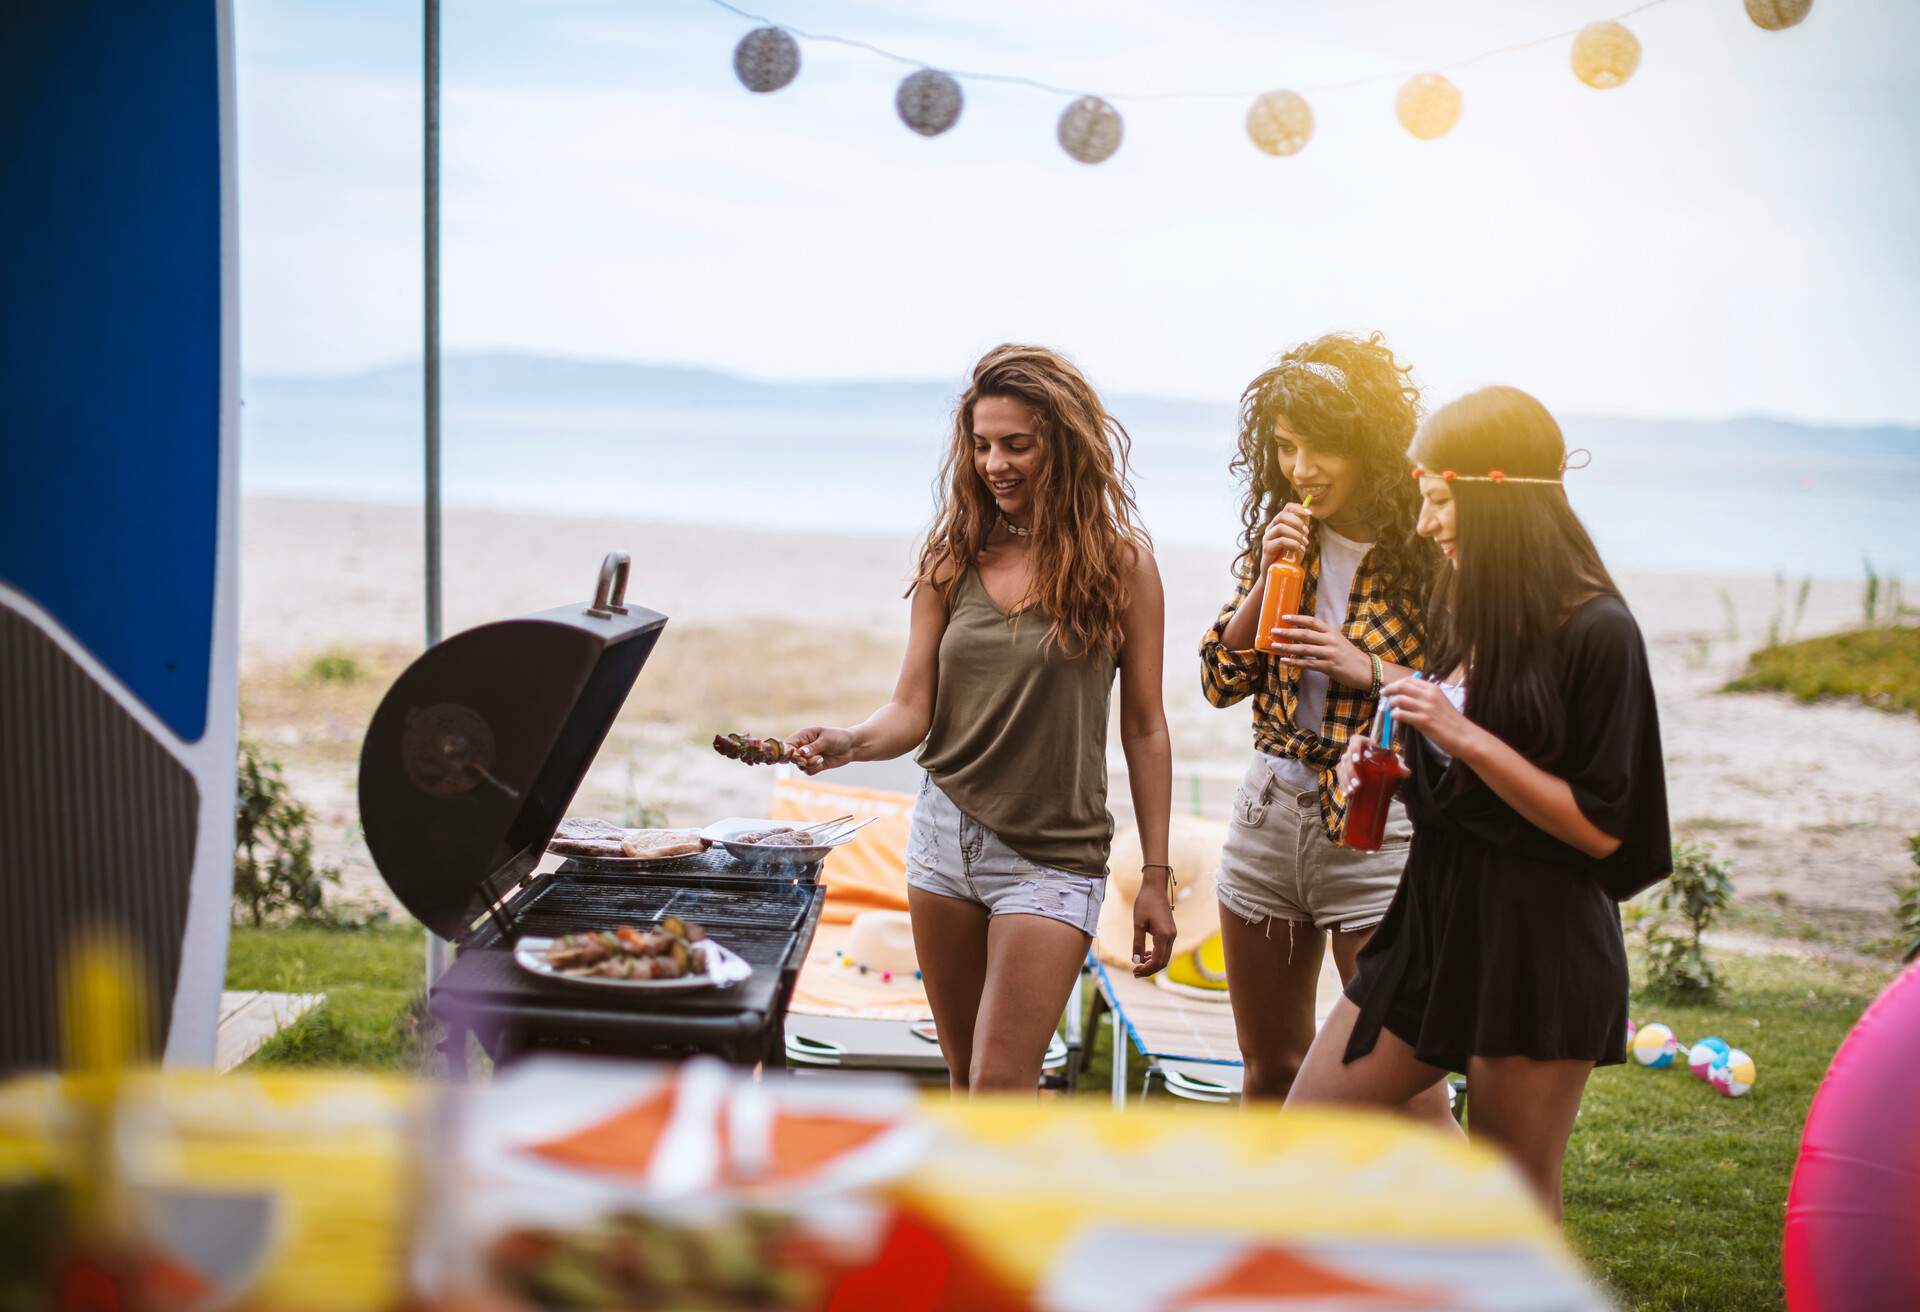 THEME_GLAMPING_CAMPING_BBQ_FRIENDS_GettyImages-1152136813